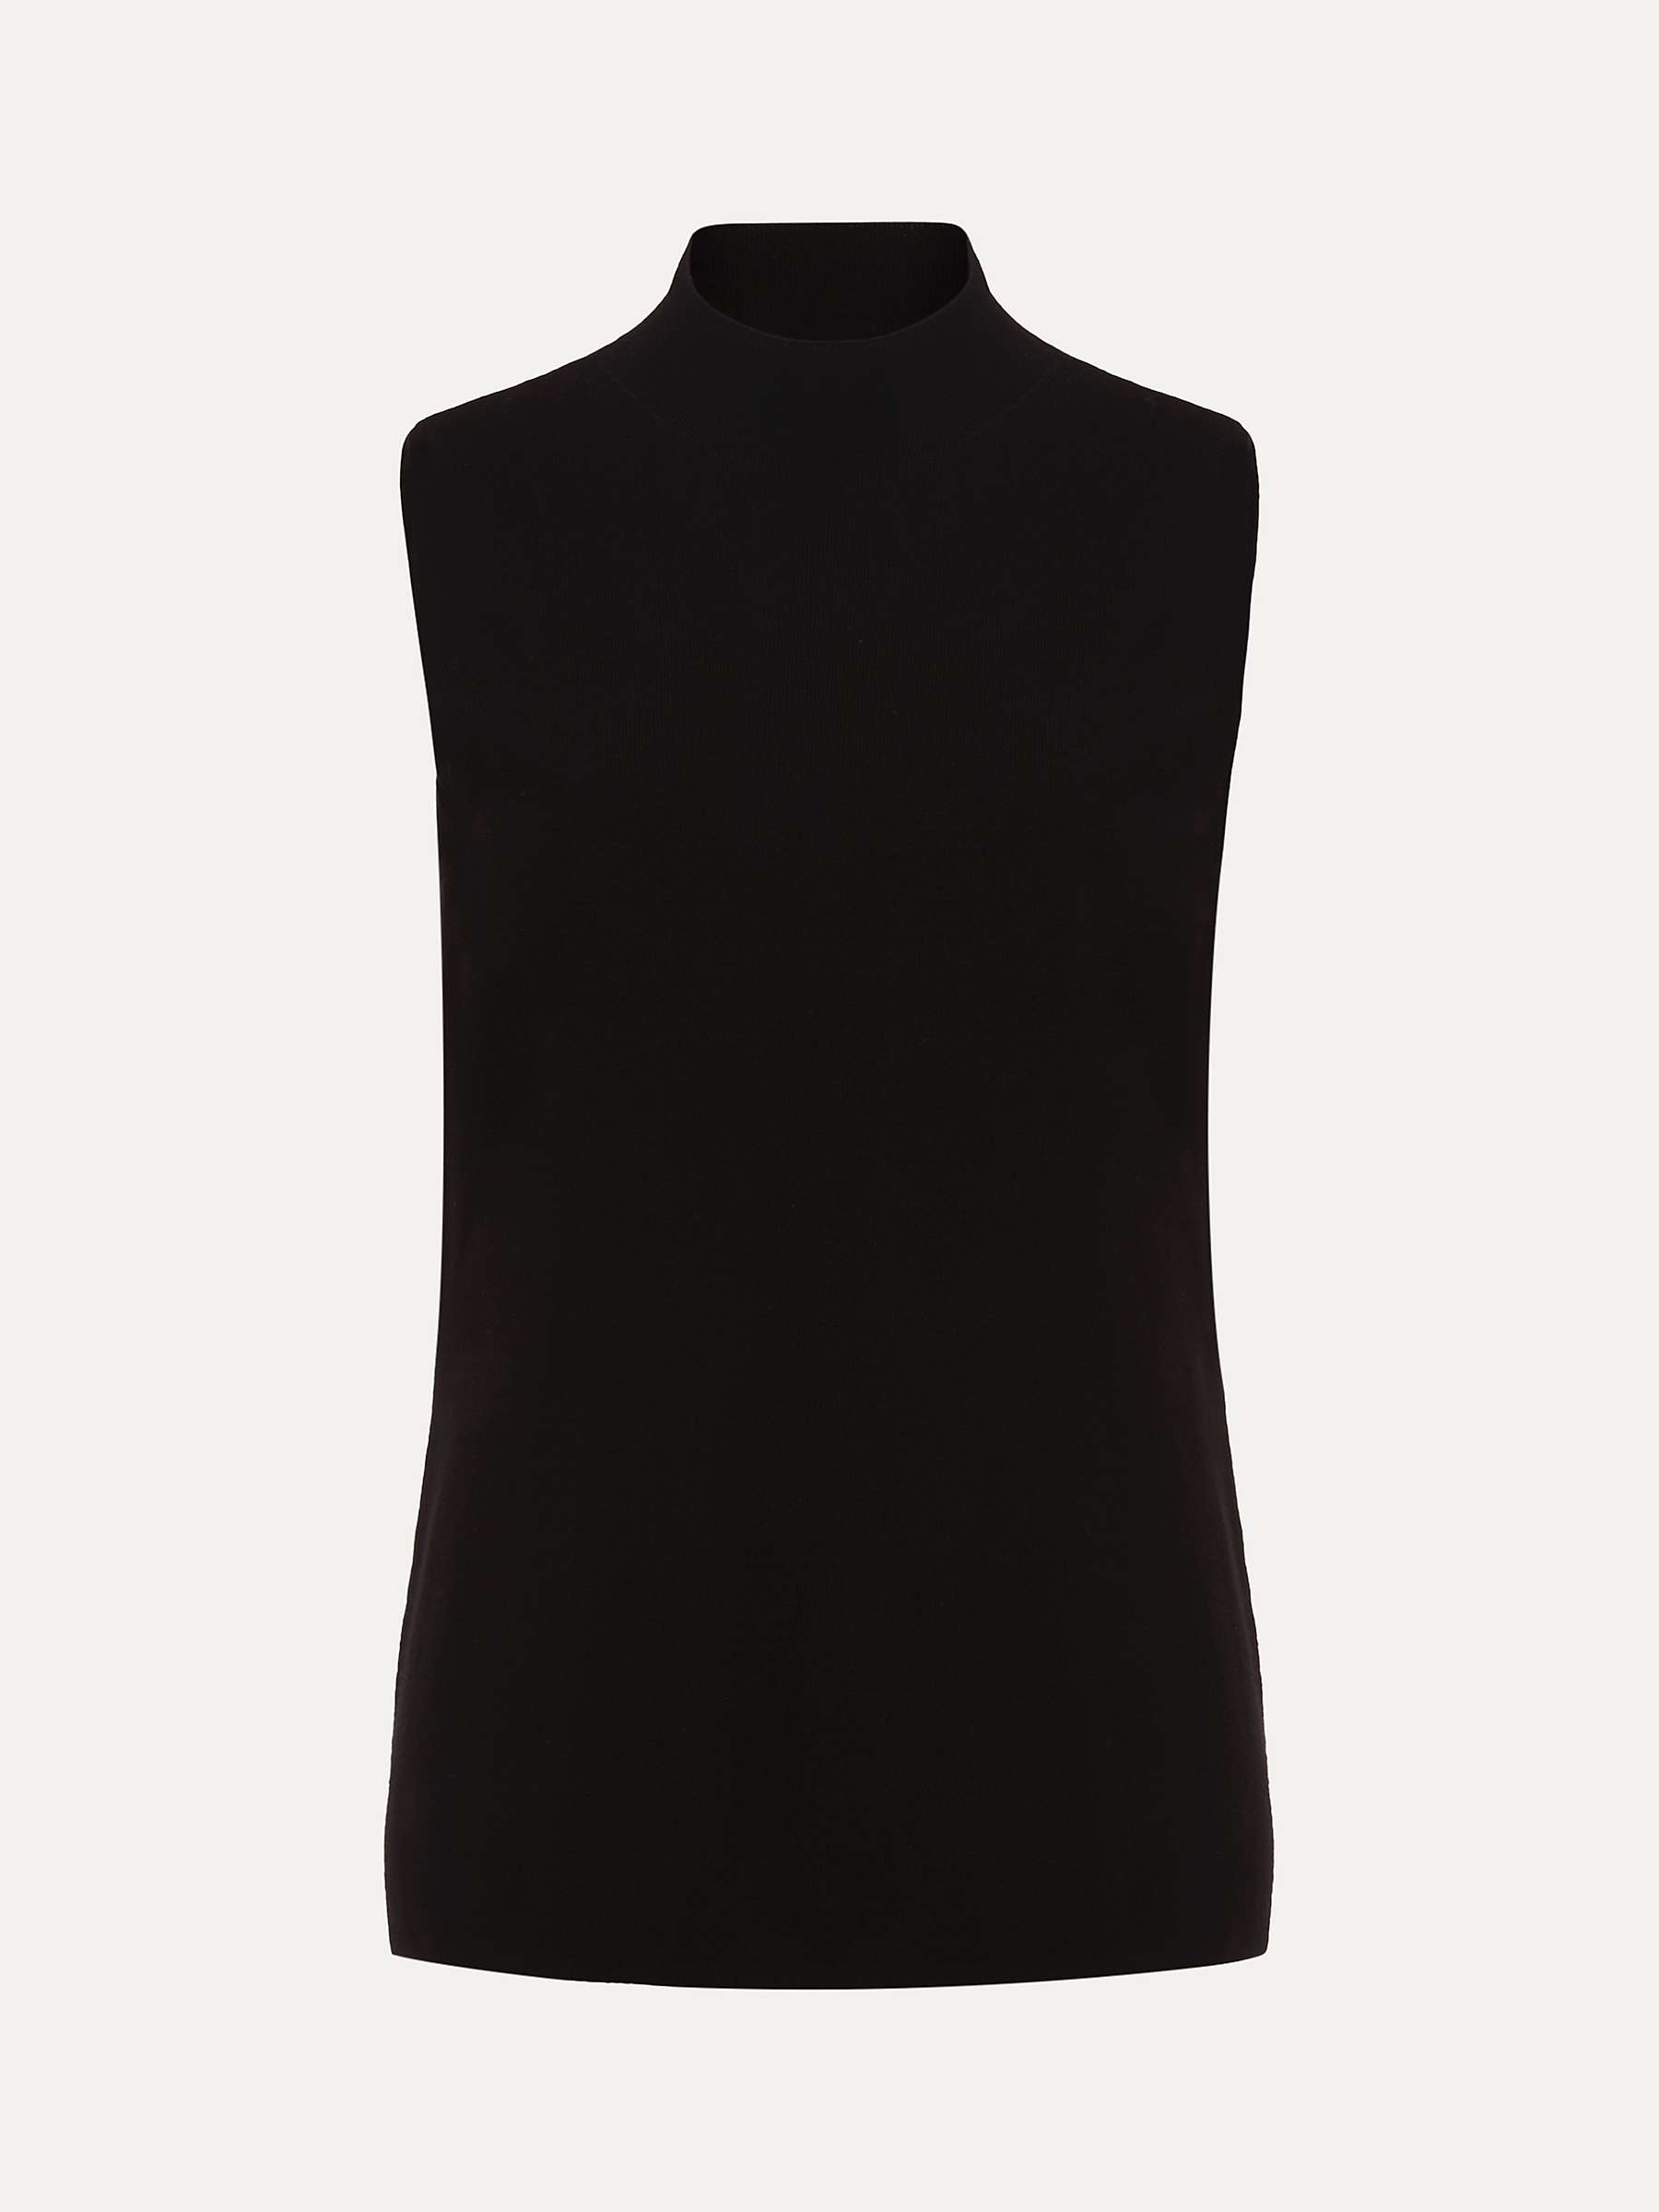 Buy Phase Eight Miley High Neck Sleeveless Tank Top Online at johnlewis.com